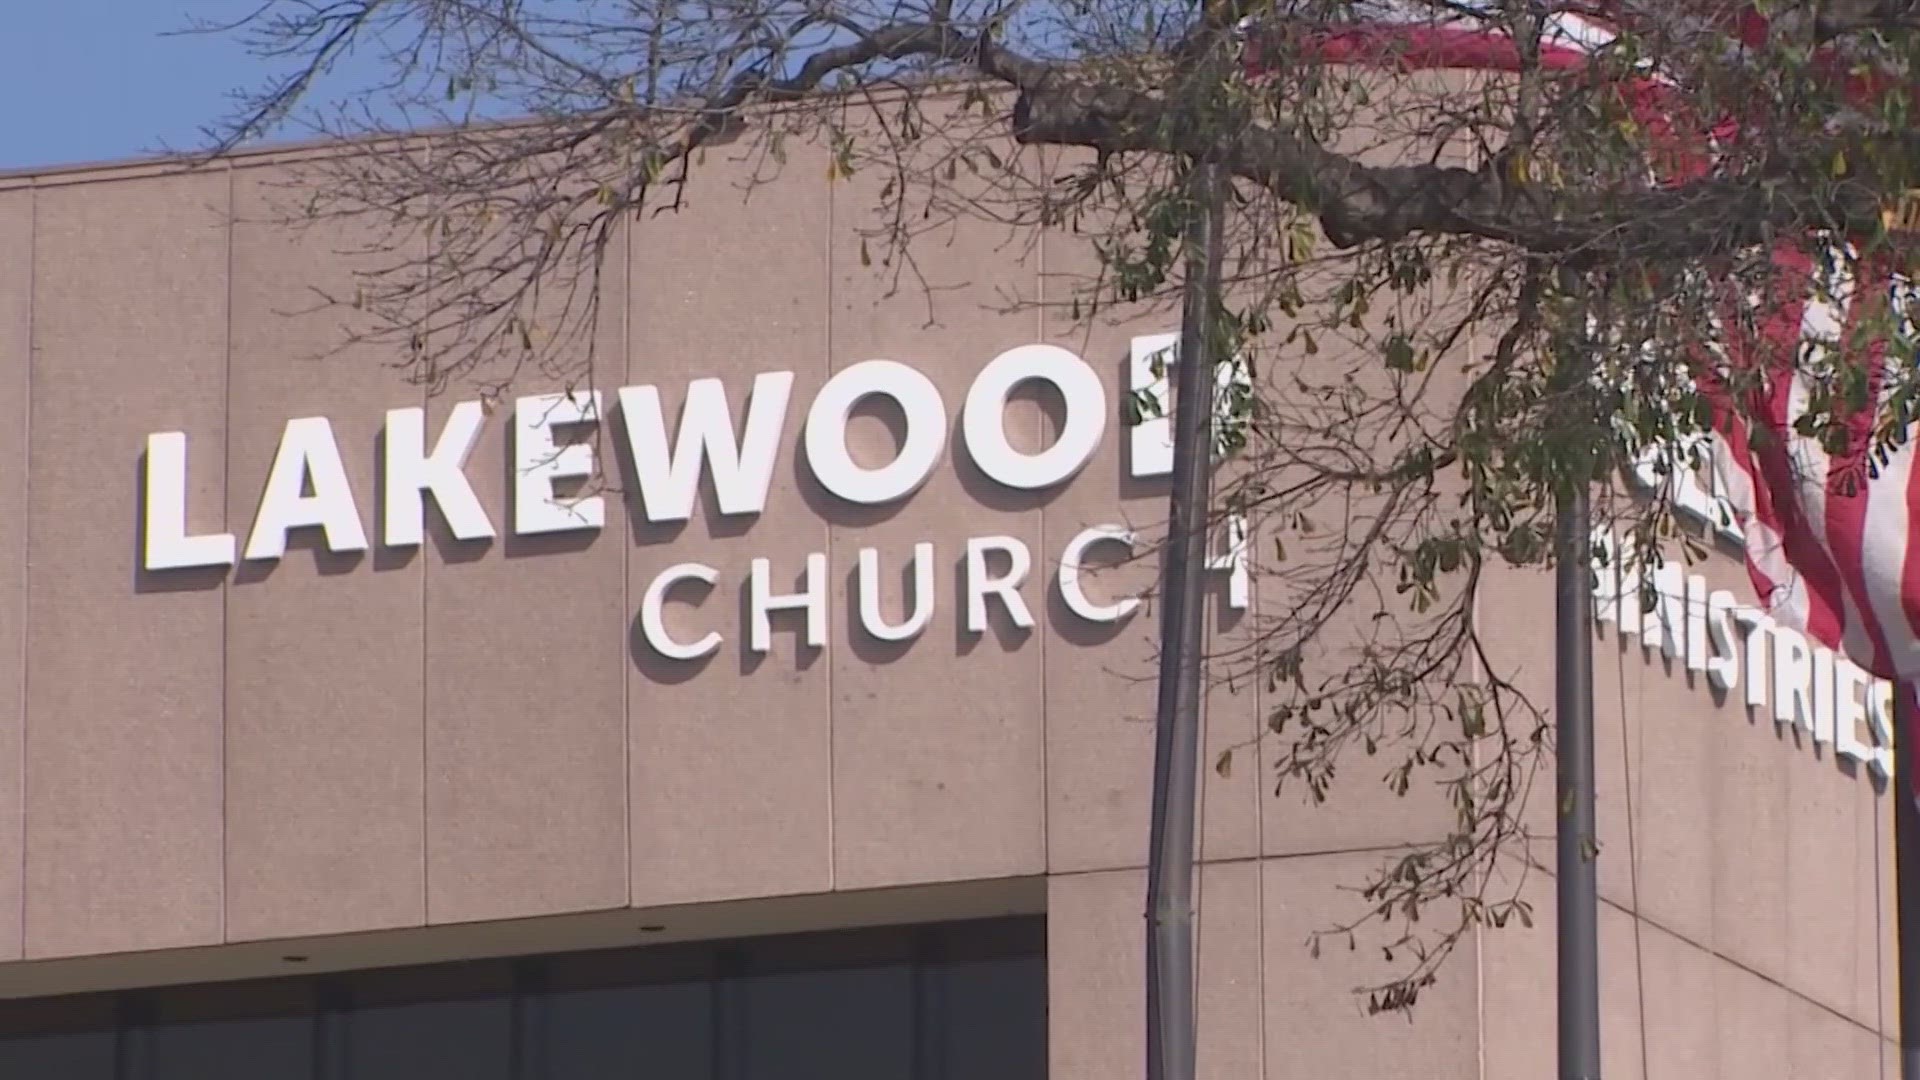 The woman visited Lakewood Church on the day of the shooting because she'd been following Pastor Danilo Montero for years.